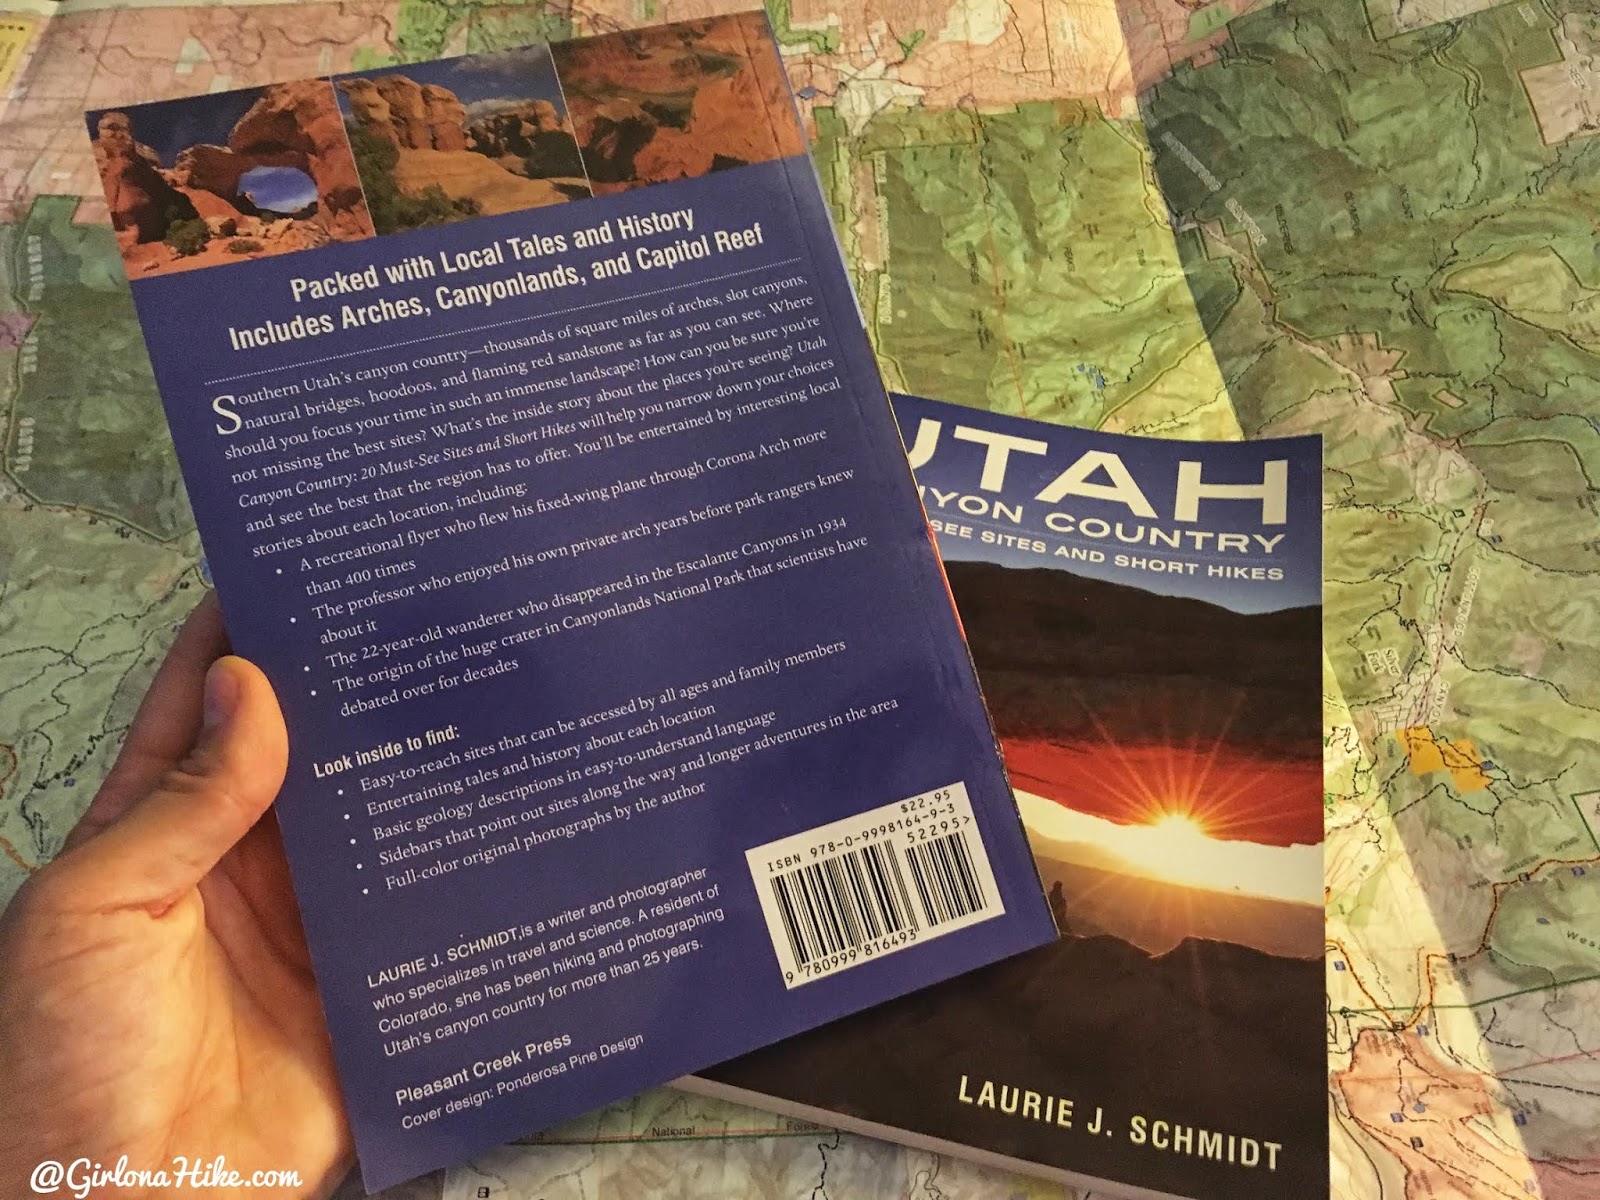 Book Review - Utah Canyon Country: 20 Must-see Sites and Short Hikes